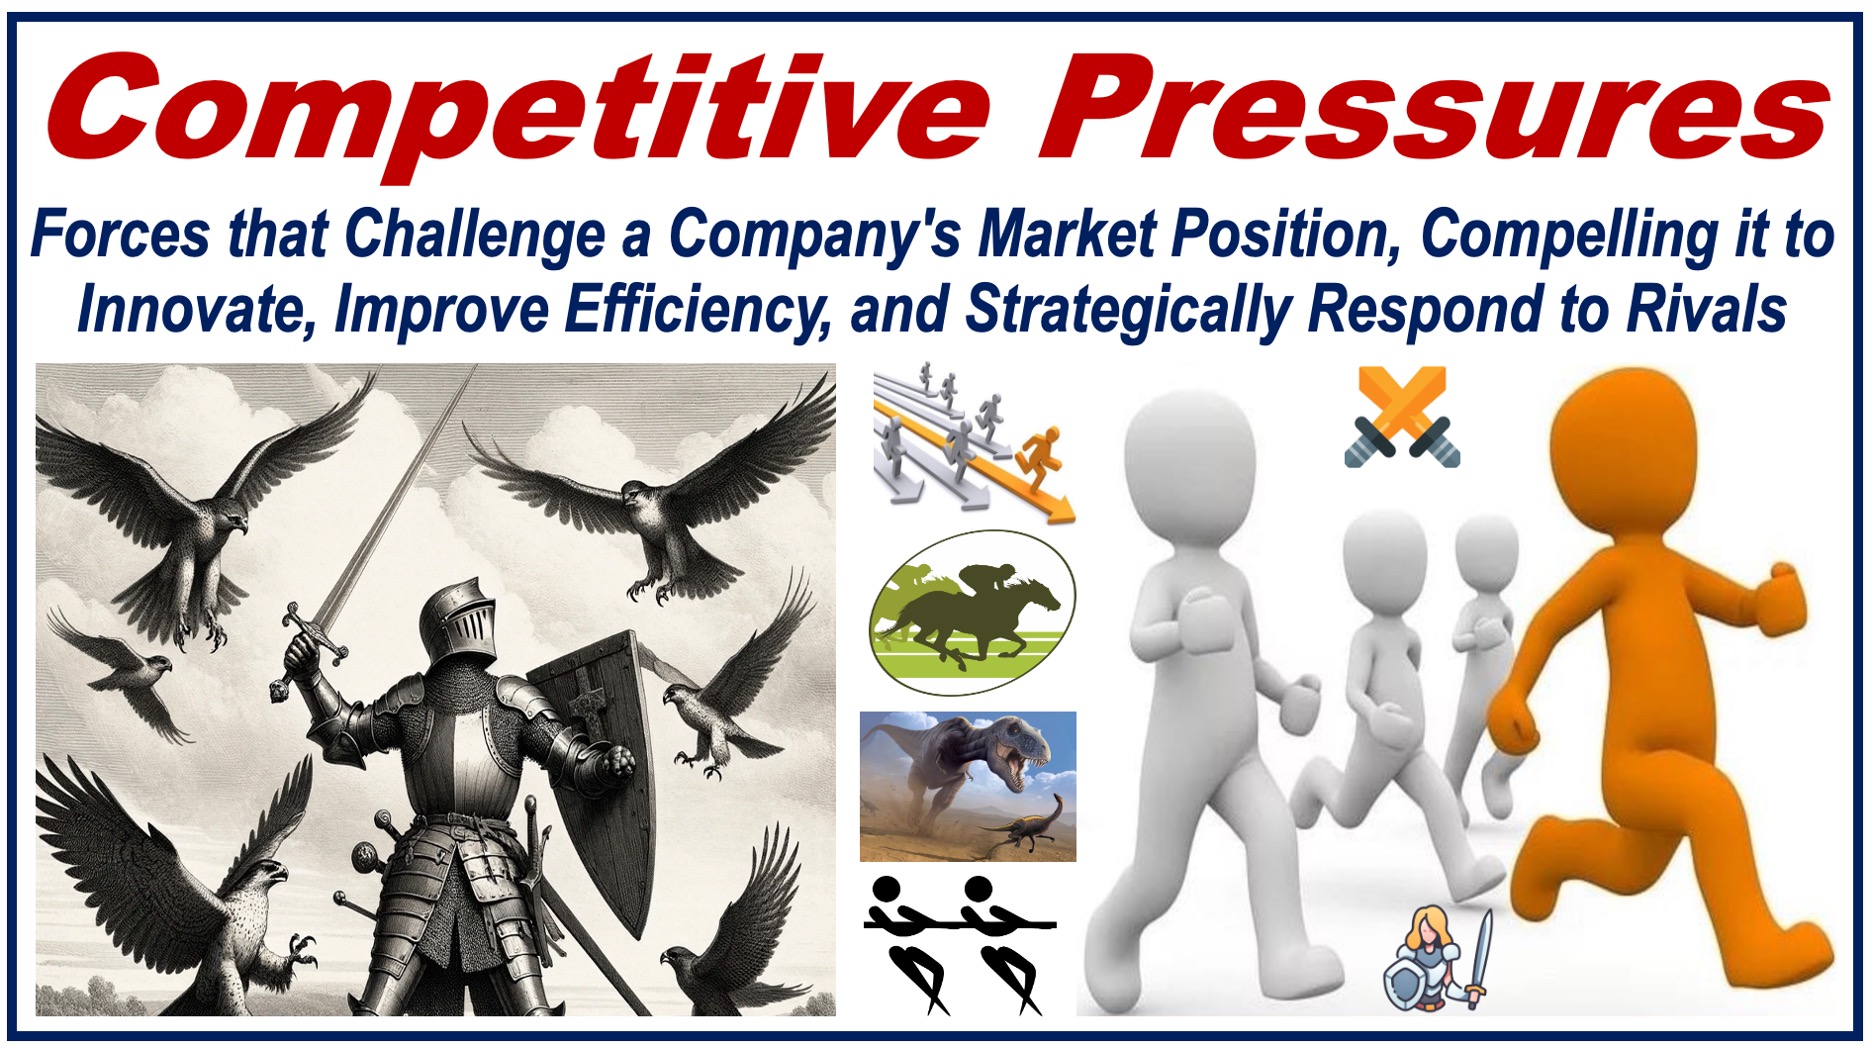 Many images depicting COMPETITIVE PRESSURES plus a written definition of the term.